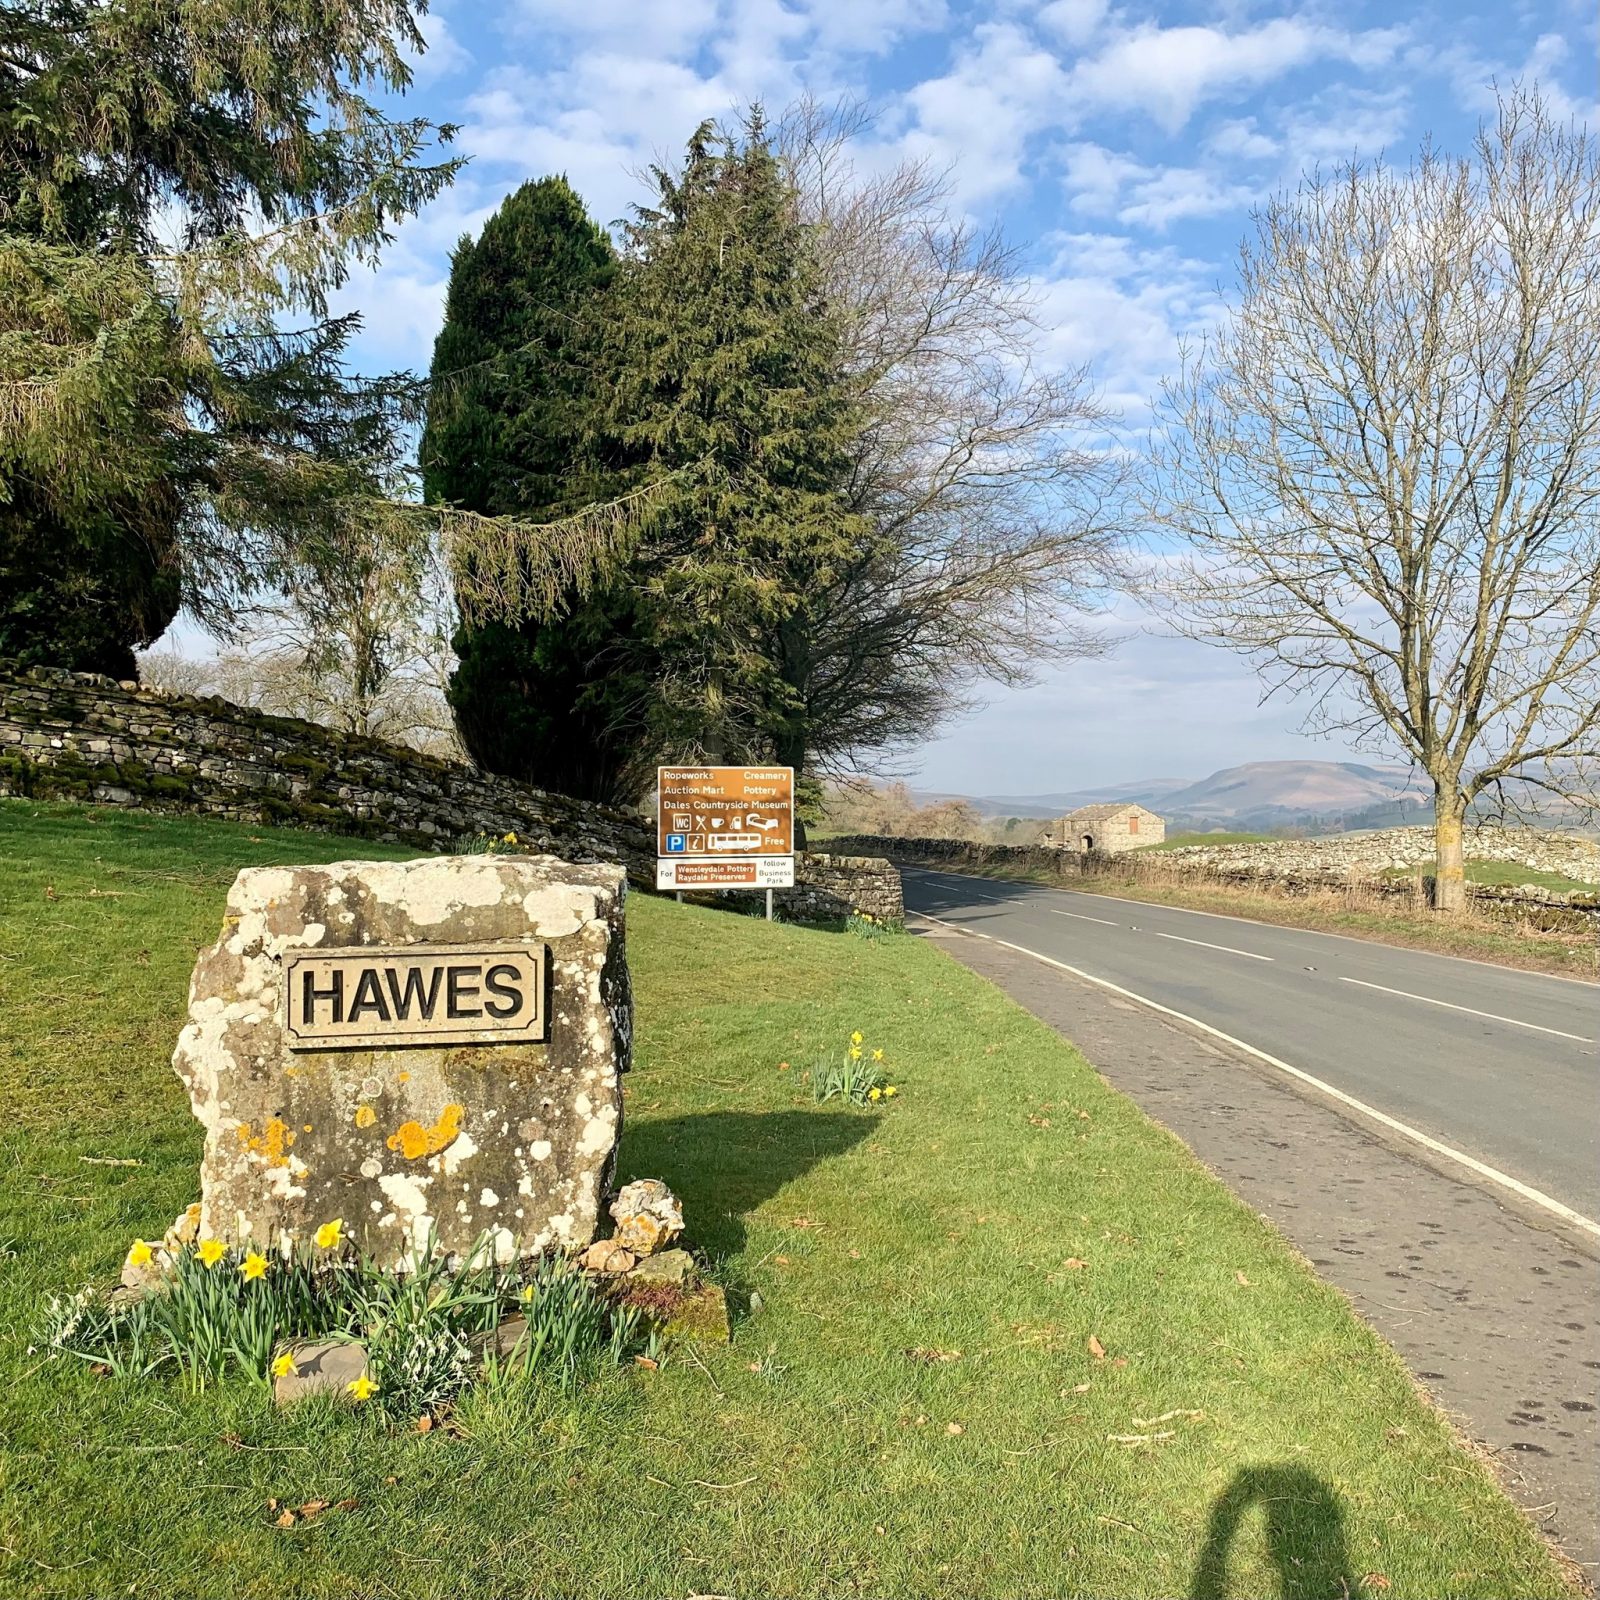 Entrance to Hawes for the Wensleydale Creamery. 